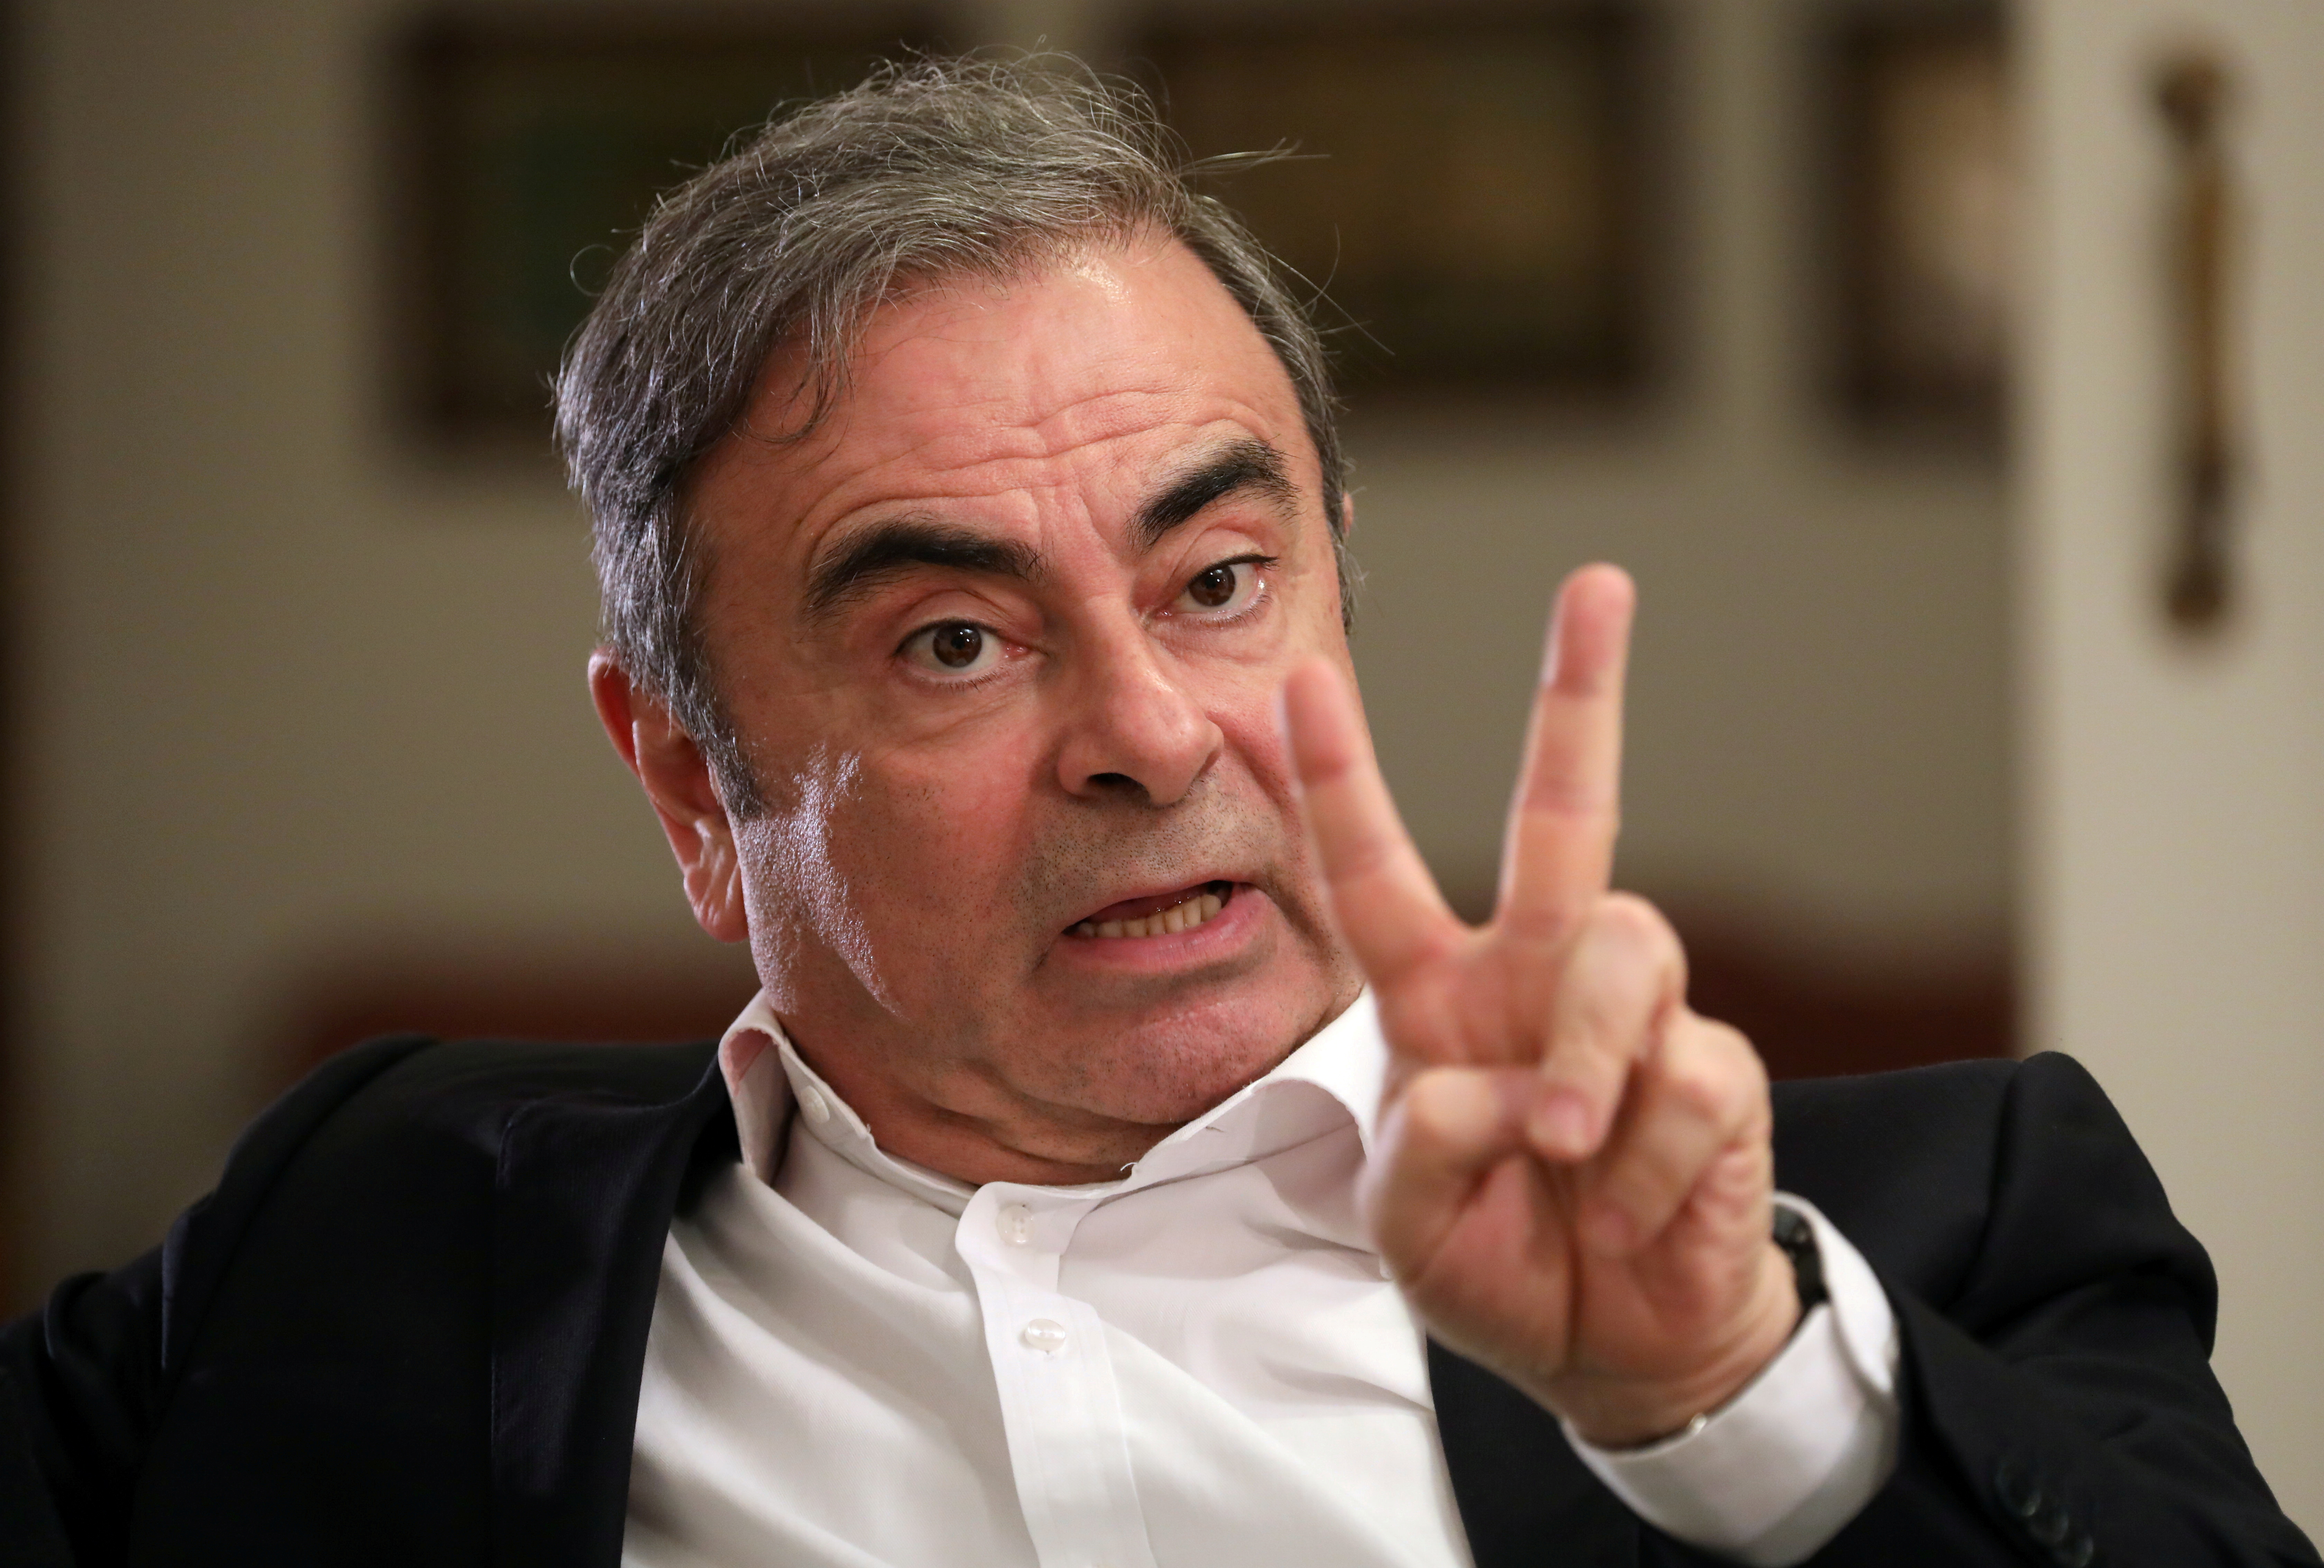 Former Nissan chairman Carlos Ghosn talks during an exclusive interview with Reuters in Beirut